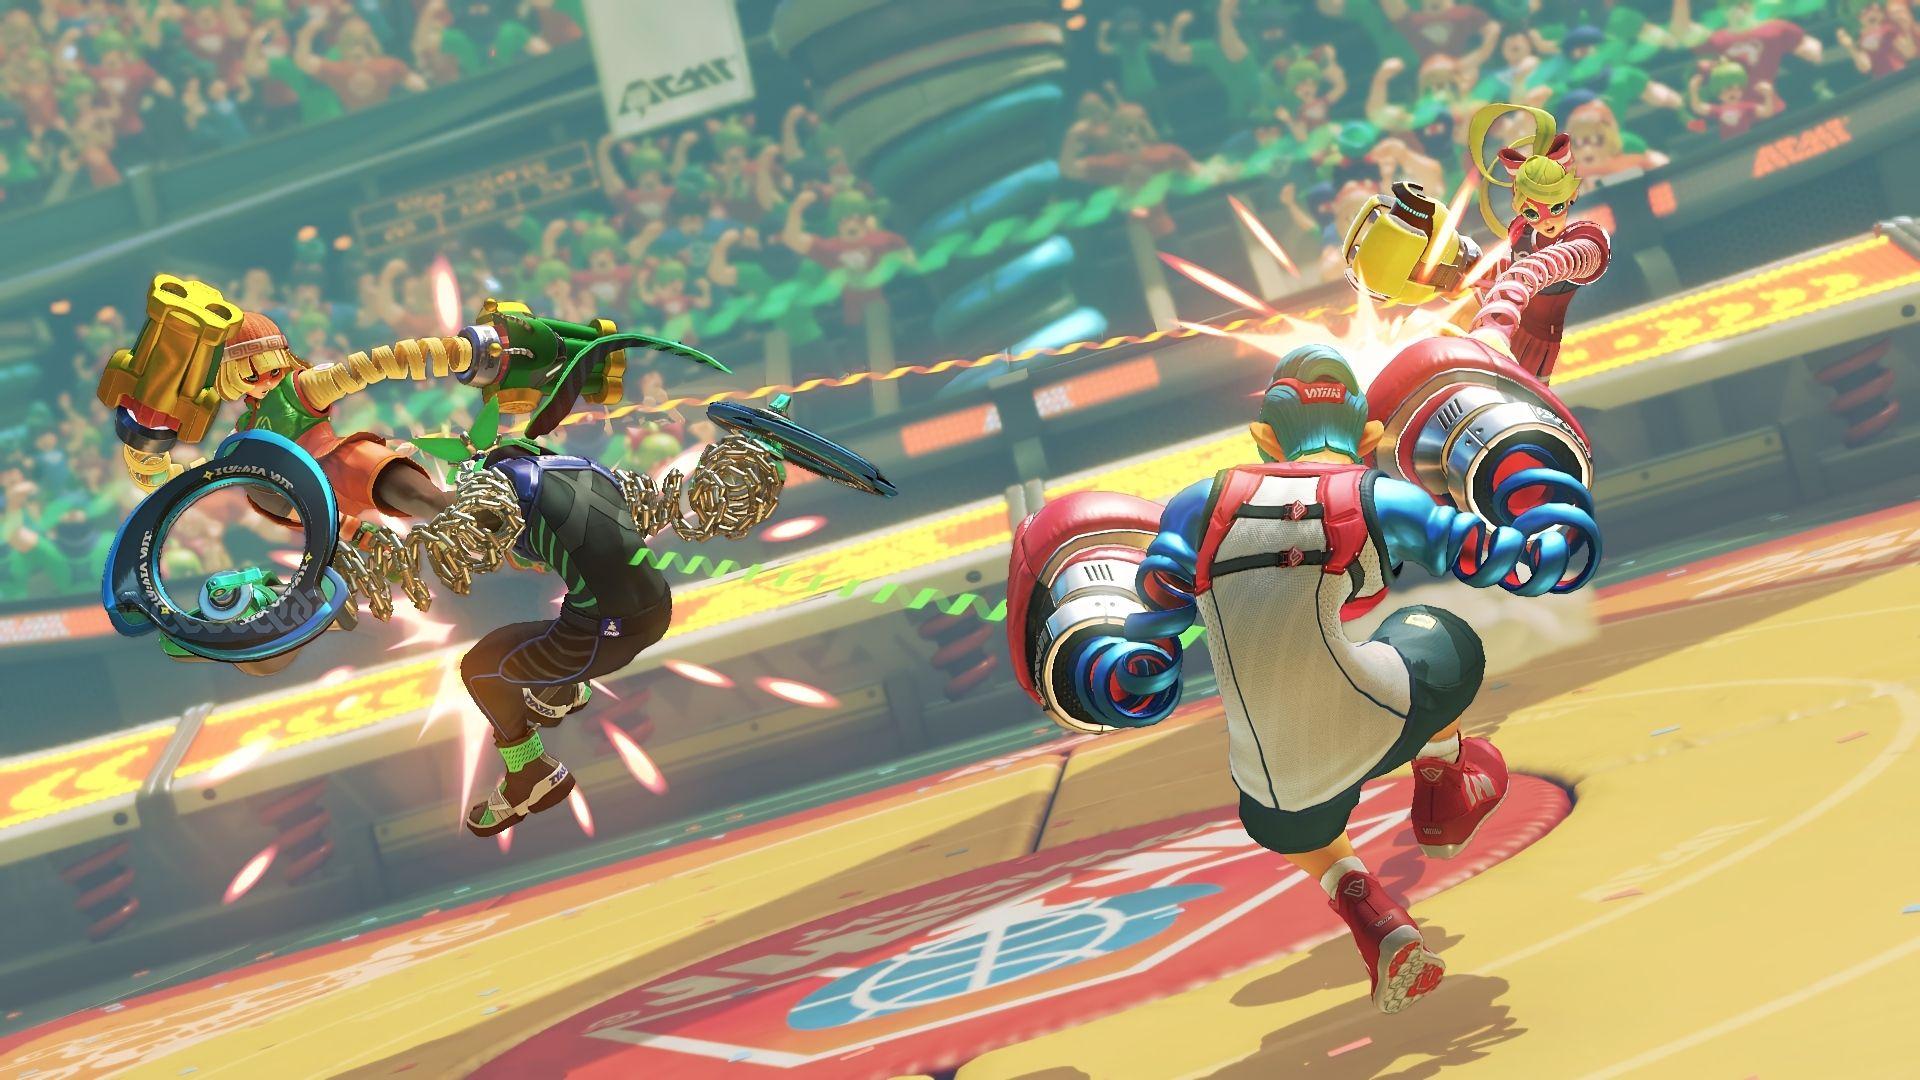 Awesome Arms Battle Game Nintendo Switch 1920x1080 wallpaper